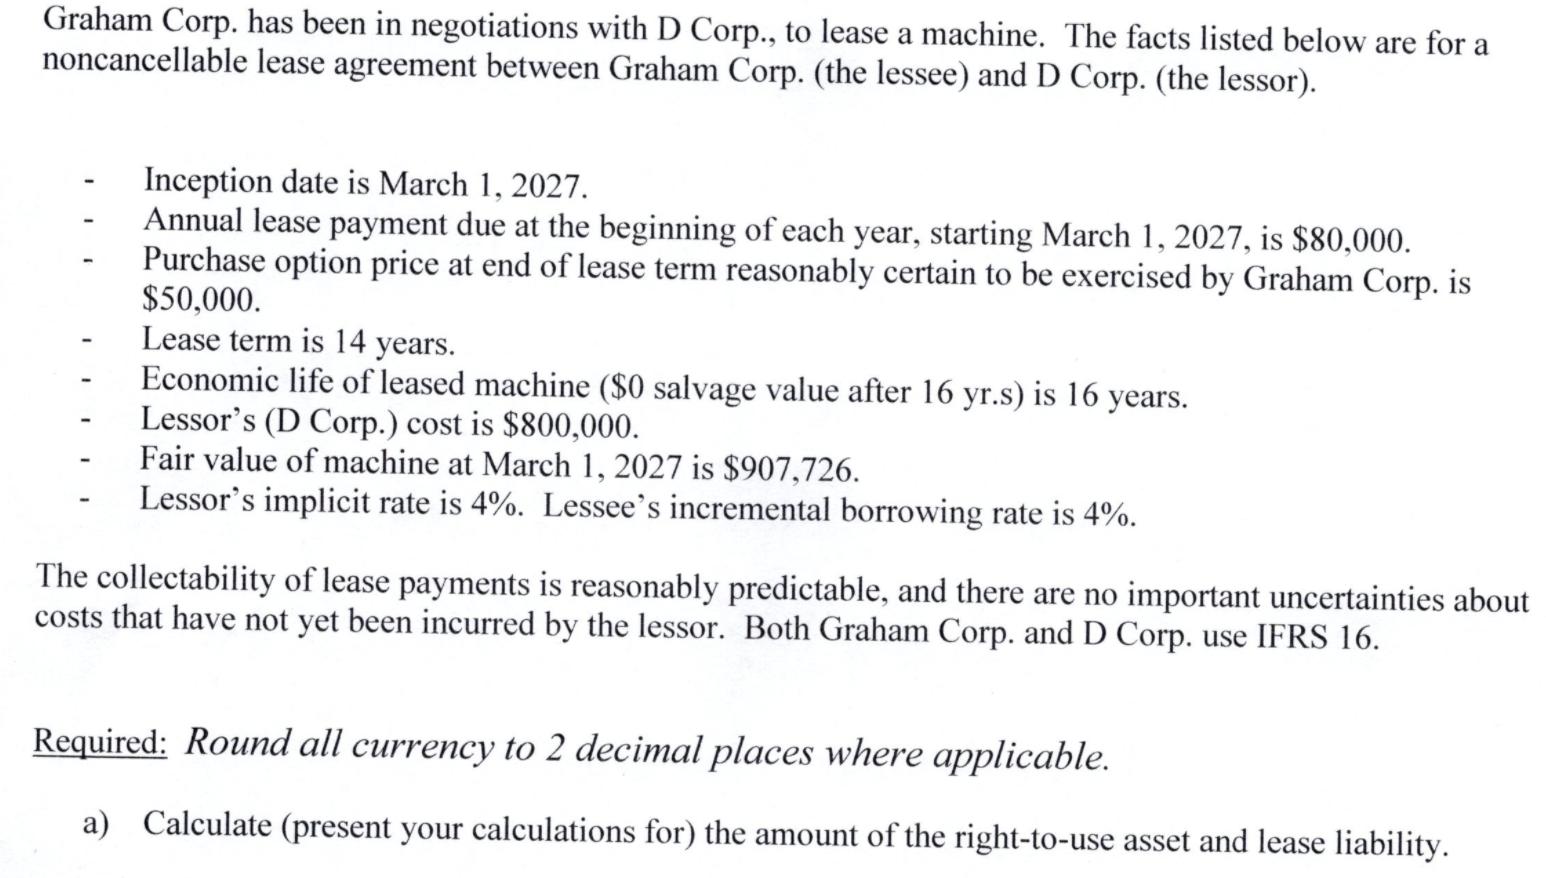 Graham Corp. has been in negotiations with D Corp., to lease a machine. The facts listed below are for a noncancellable lease